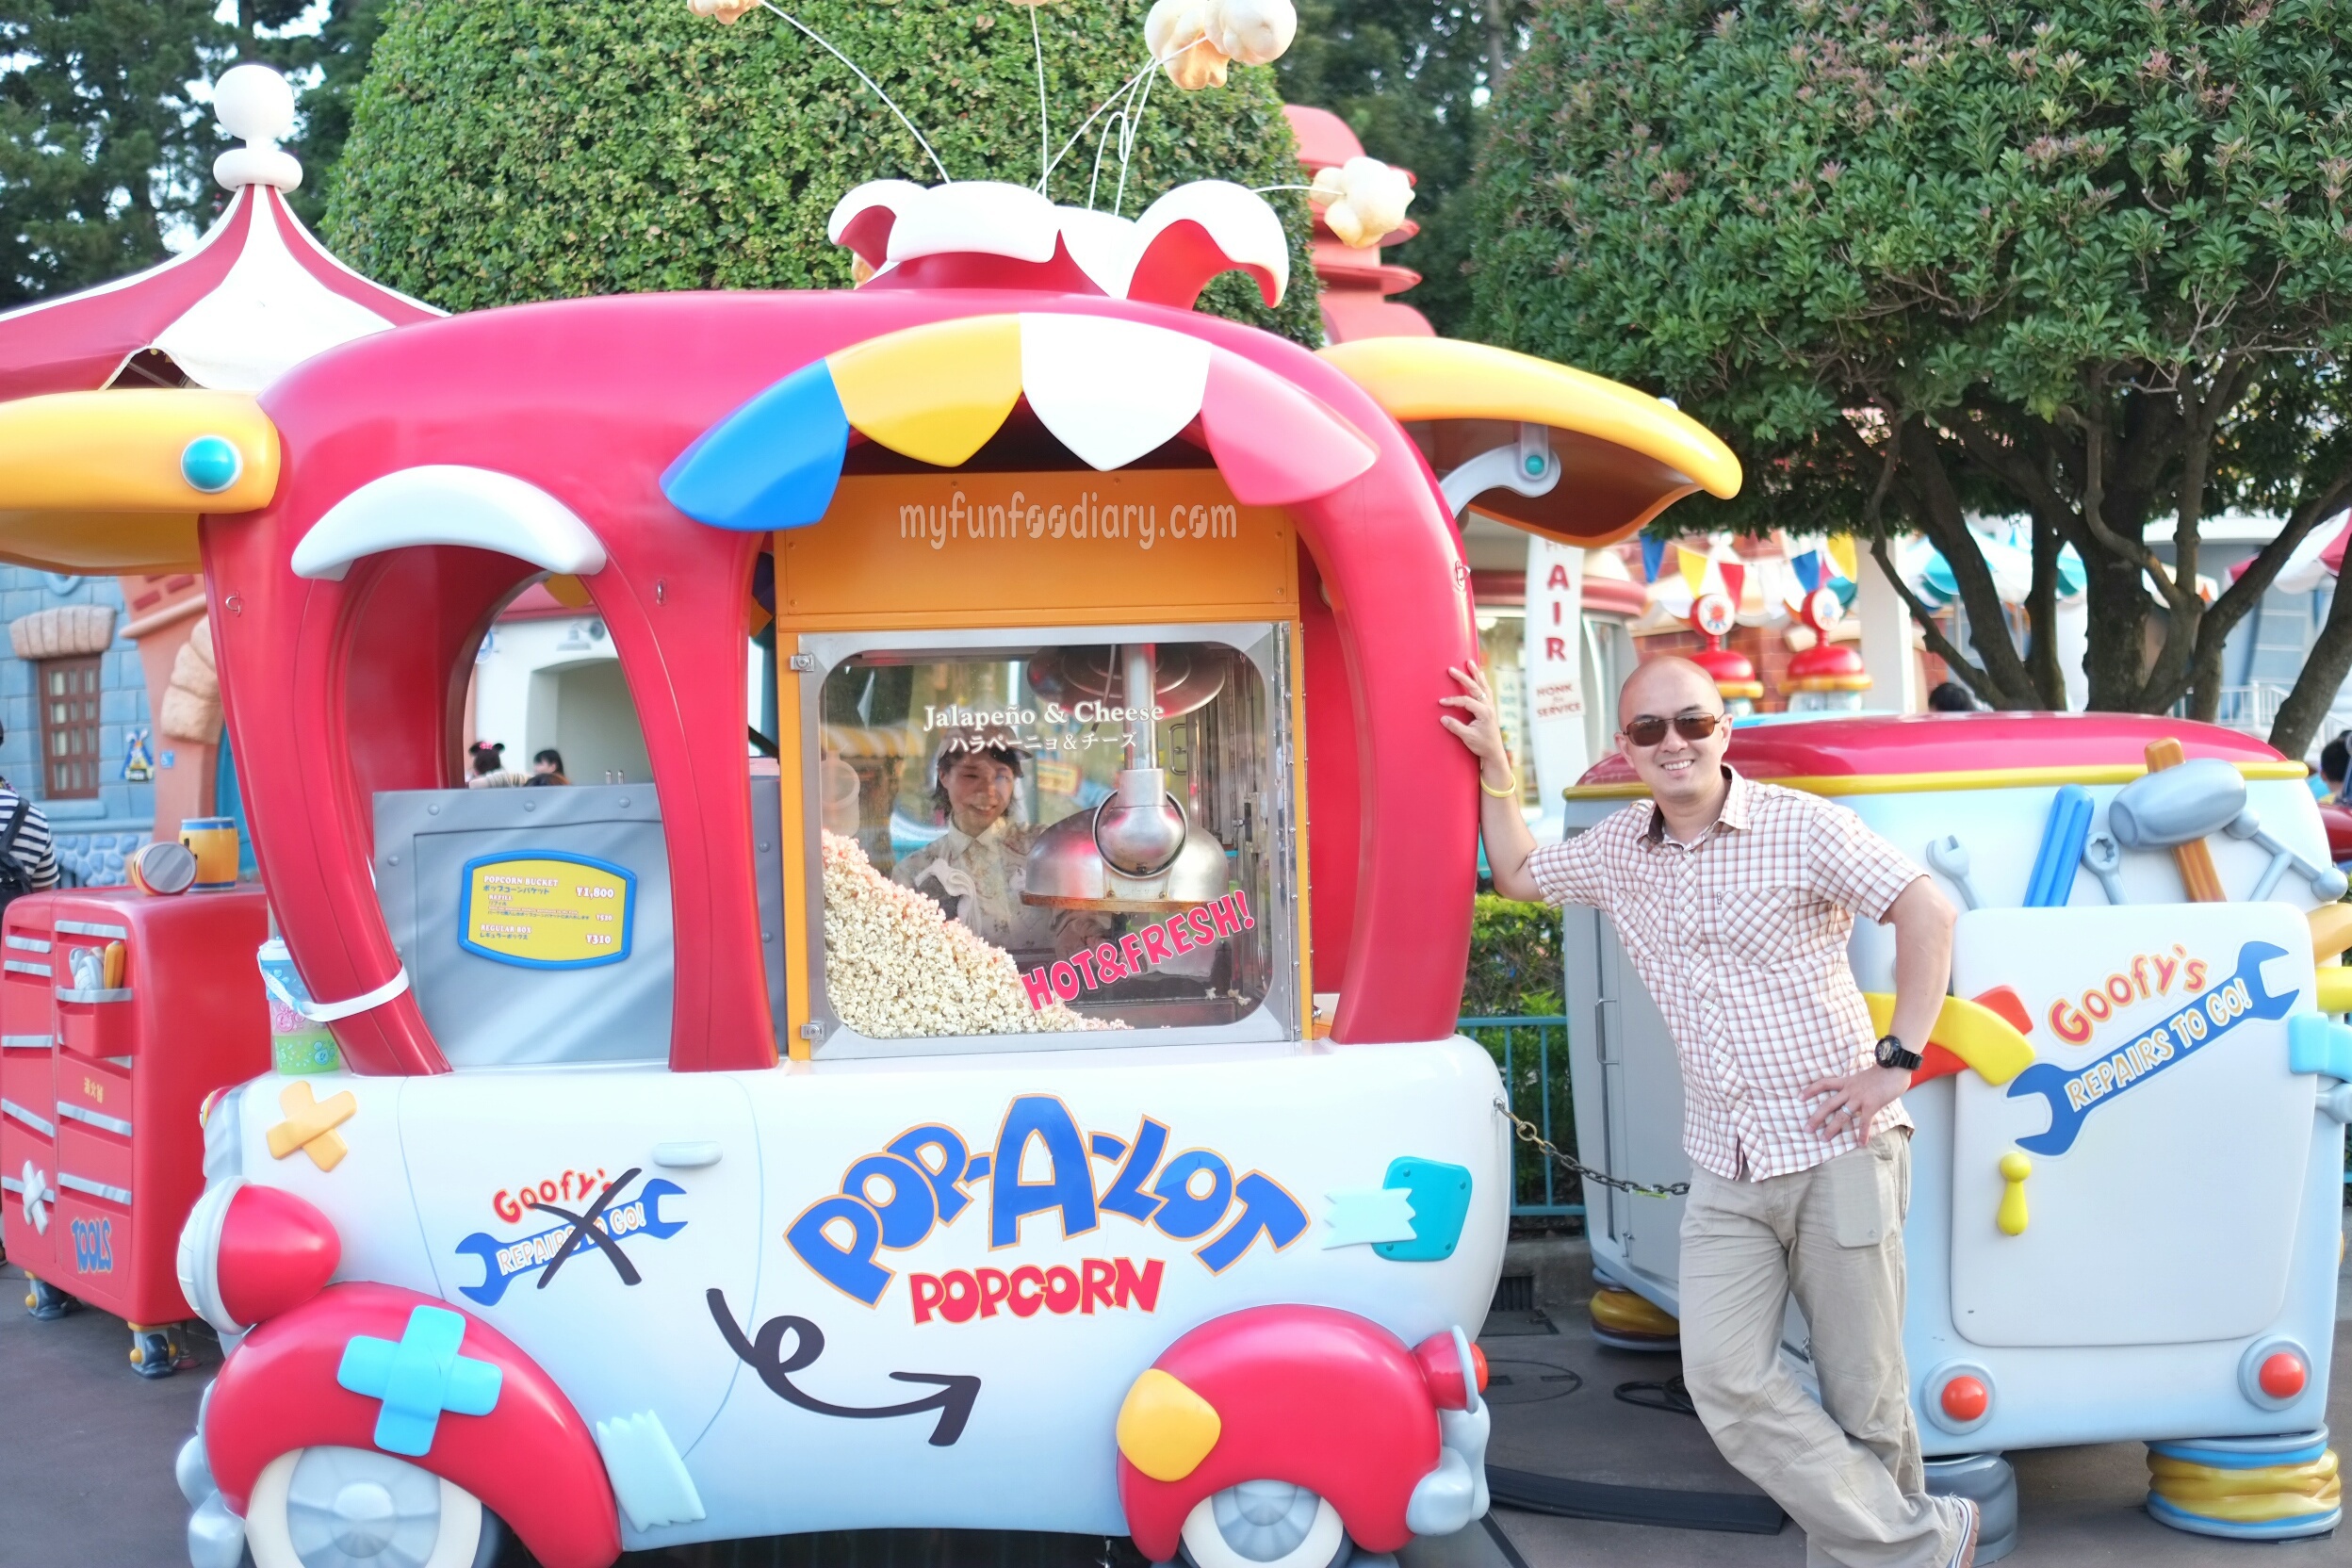 Andy sells popcorn at ToonTown Tokyo Disneyland by Myfunfoodiary